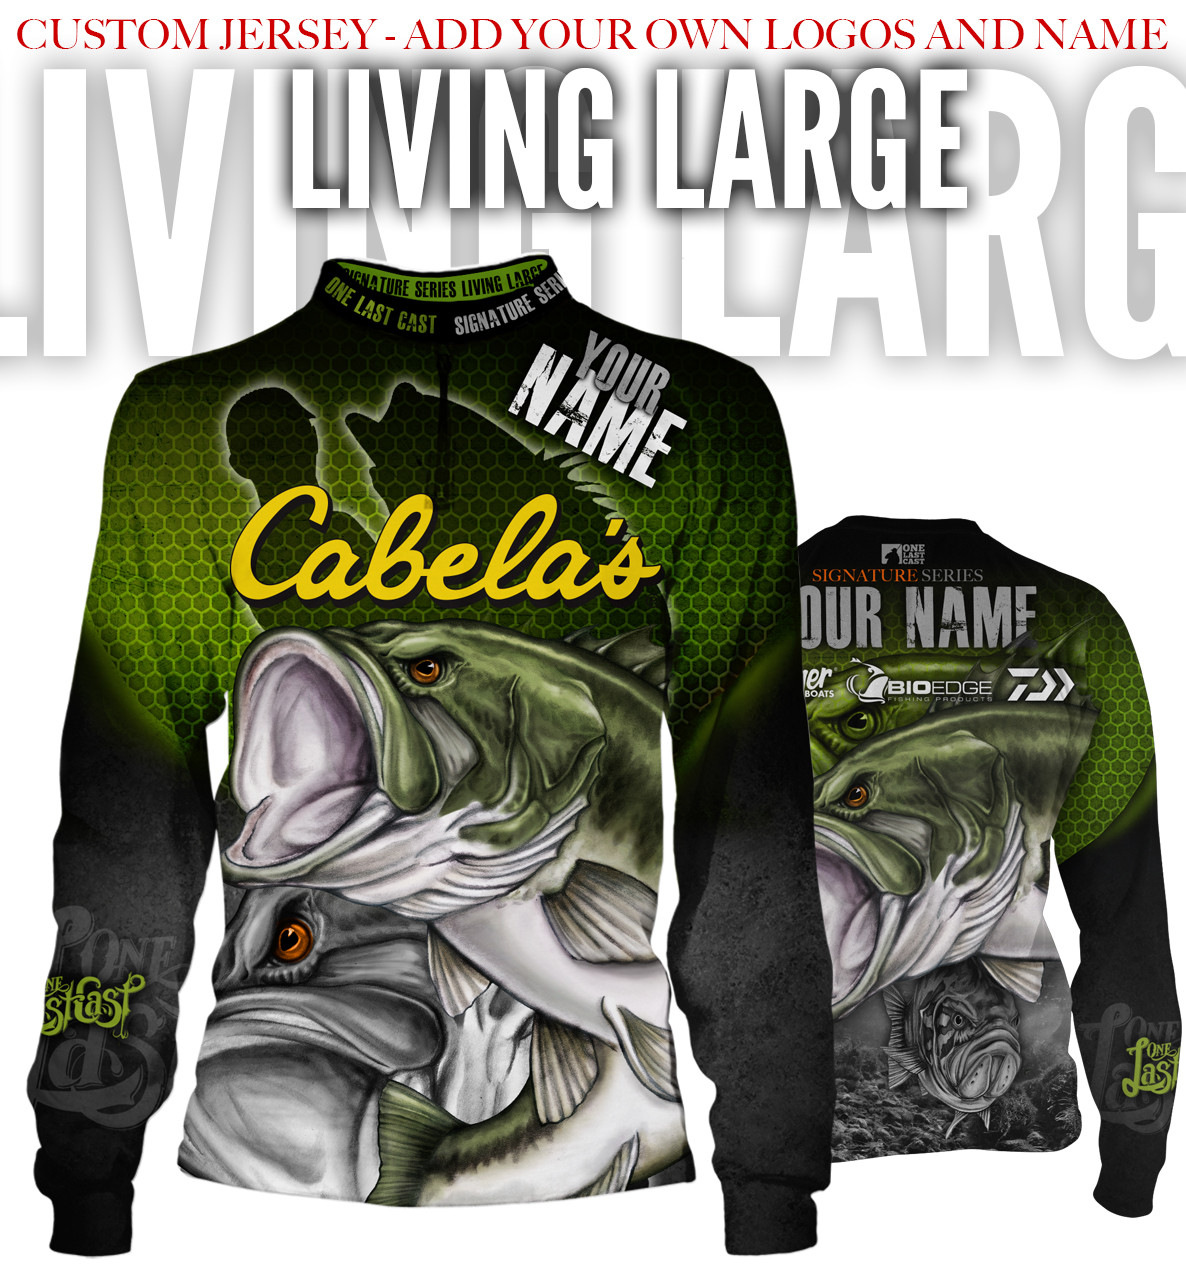 https://cdn11.bigcommerce.com/s-eemvl8dub3/images/stencil/1280x1280/products/221/1000/Living_Large_Bass_Fishing_Jersey_One_Last_Cast_Fishing_Clothing_Fishing_Jersey_Fishing_Hoodie__61812.1584613713.jpg?c=2?imbypass=on